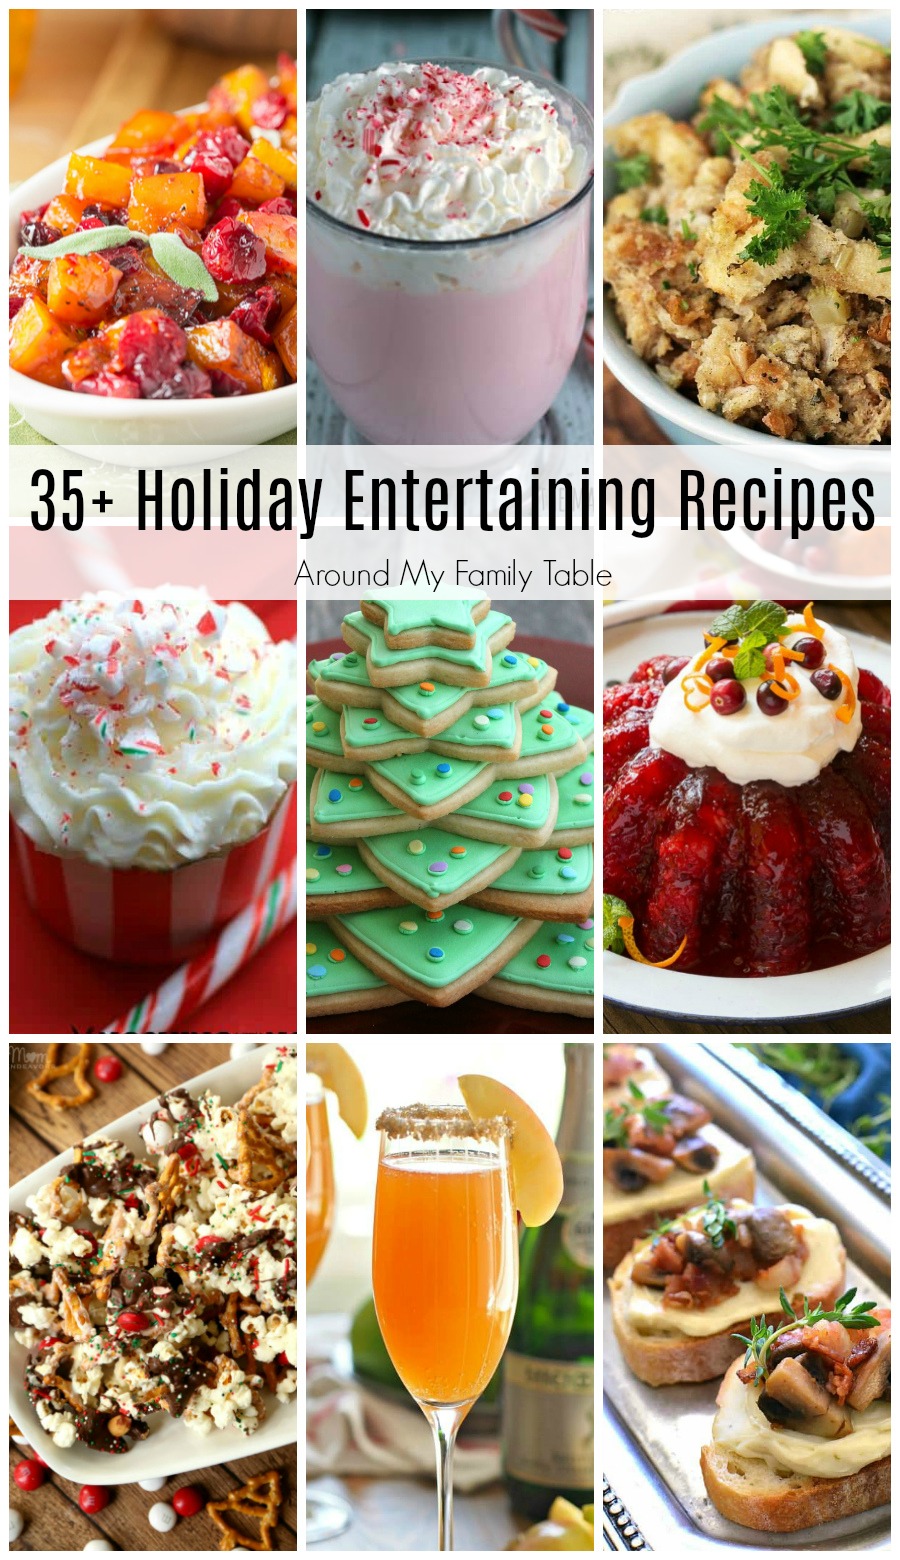 I’m always on the hunt for great holiday entertaining recipes. These 35+ Holiday Entertaining Recipes are perfect for any party that you are planning on hosting or attending this year!